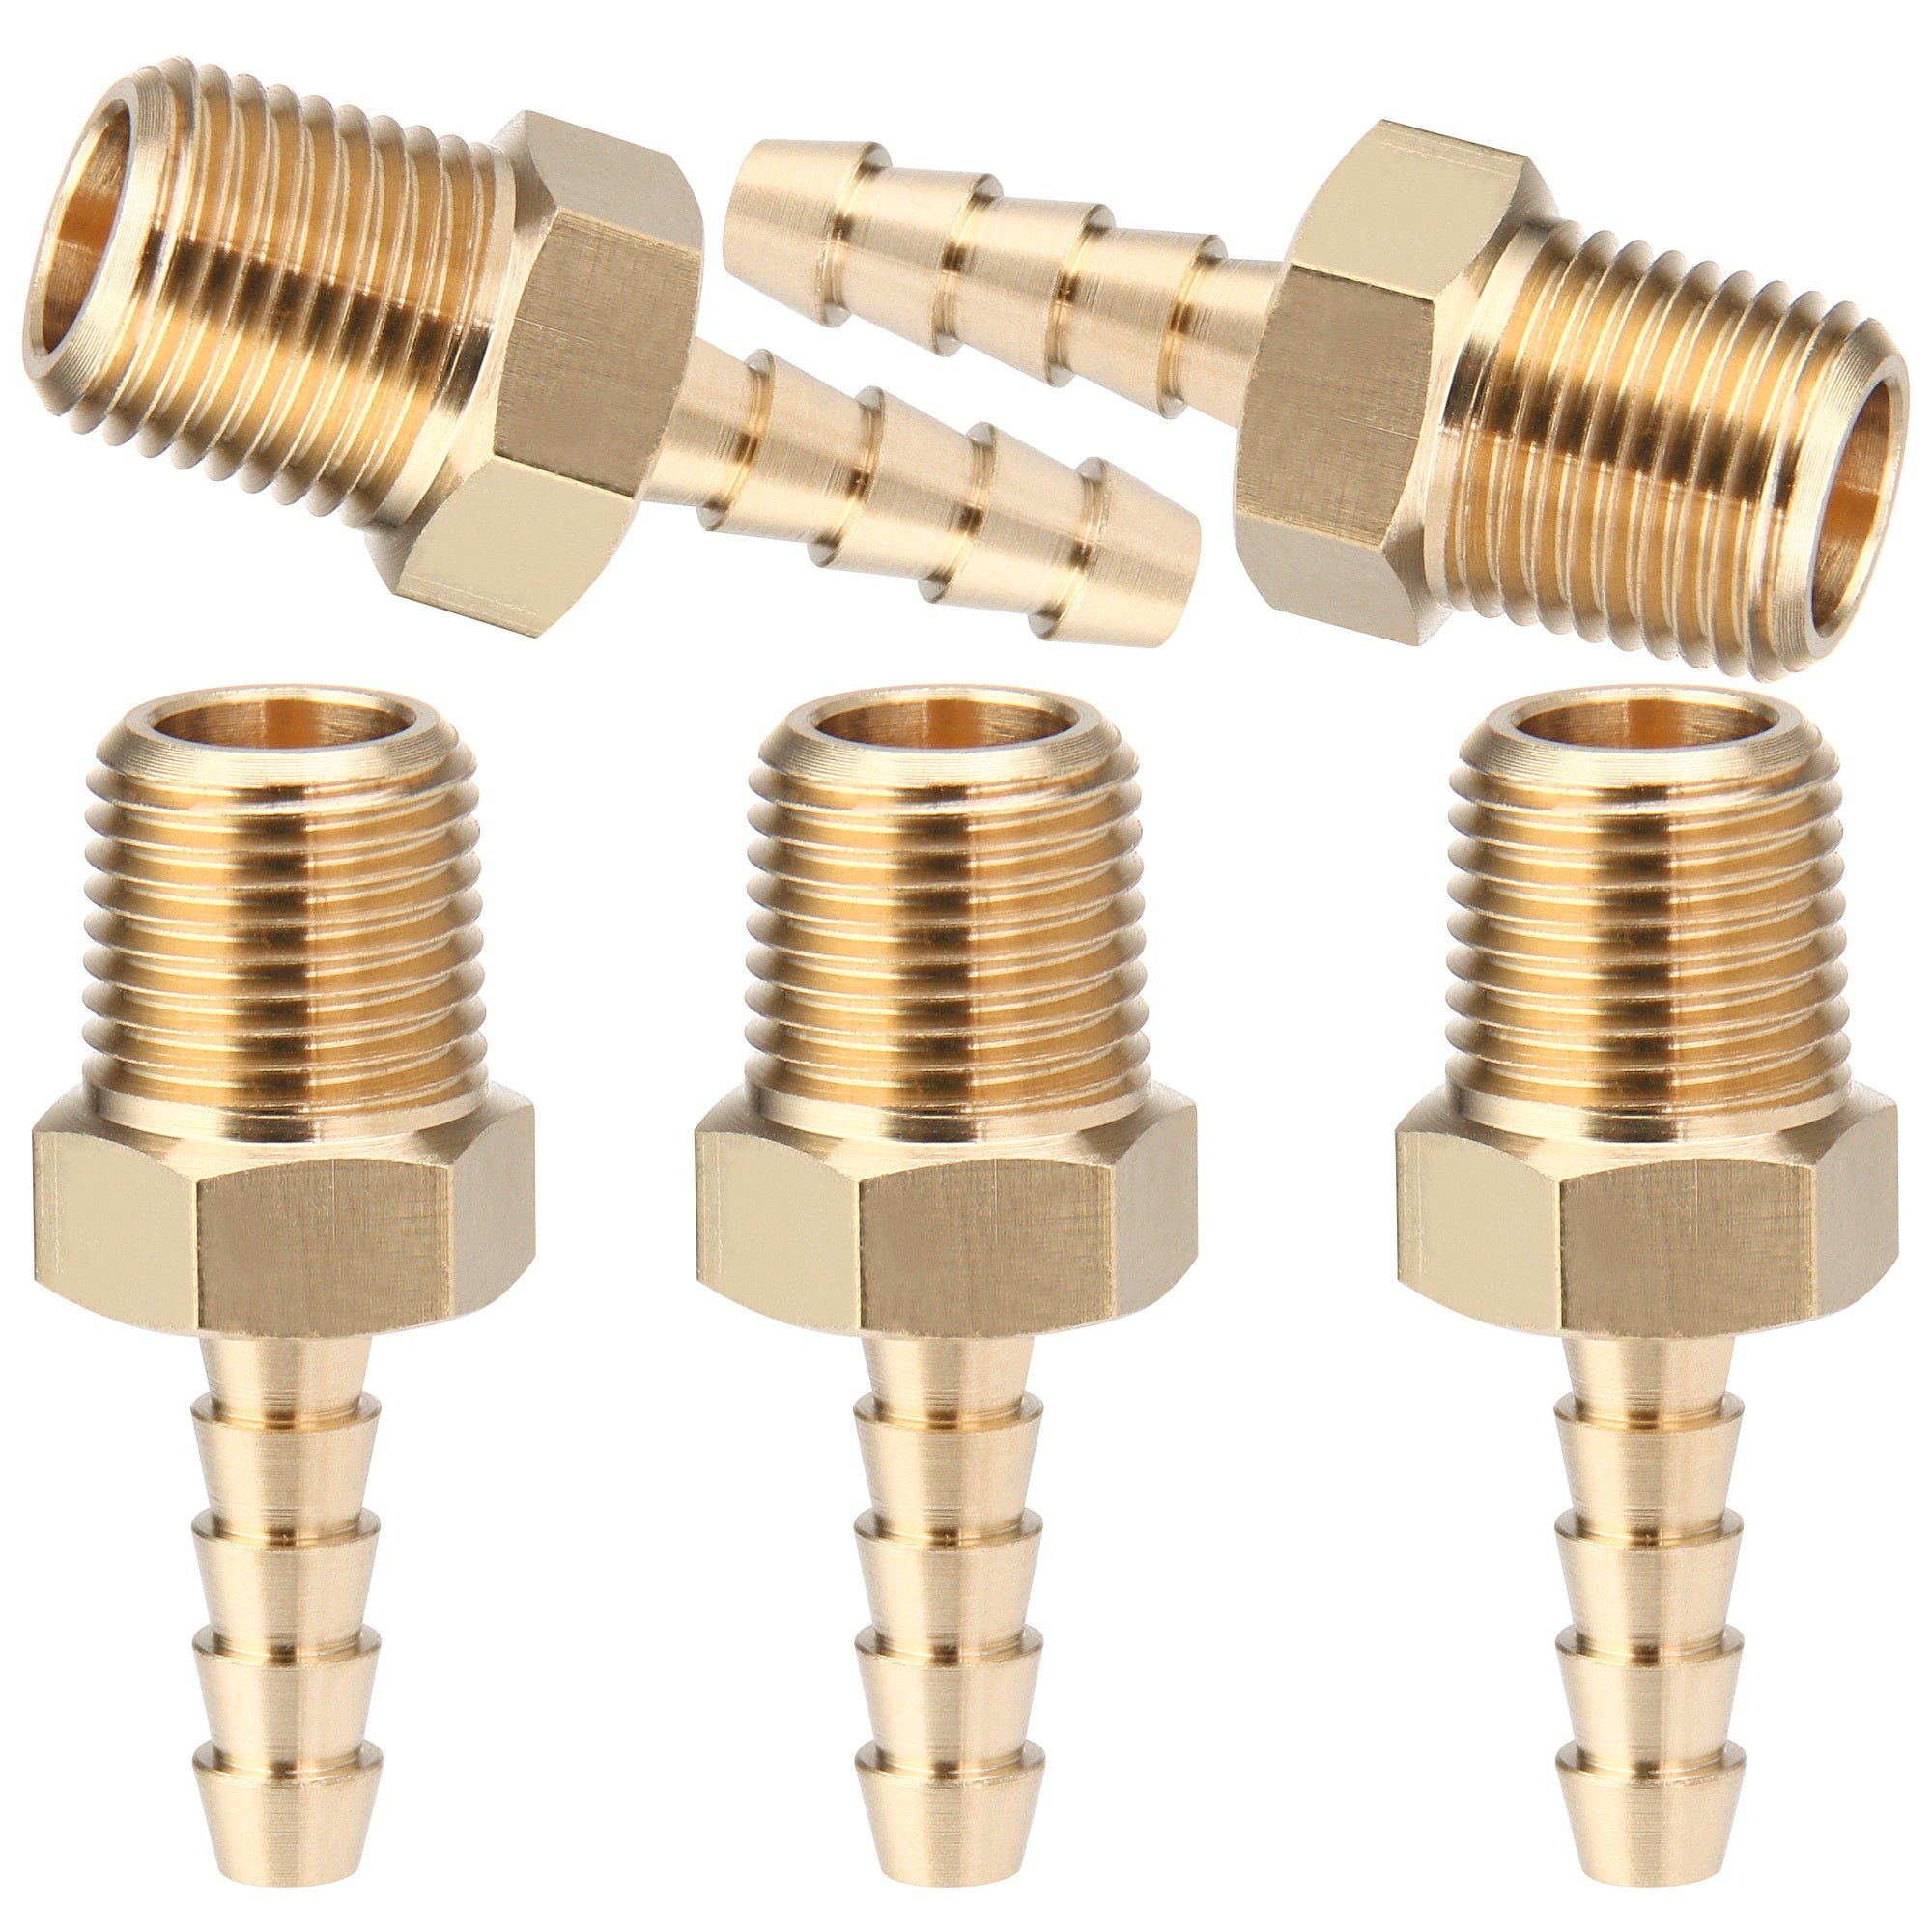 LTWFITTING Brass 1/8-Inch OD x 1/8-Inch Male NPT Compression Connector  Fitting(Pack of 5), Pipe Fittings -  Canada